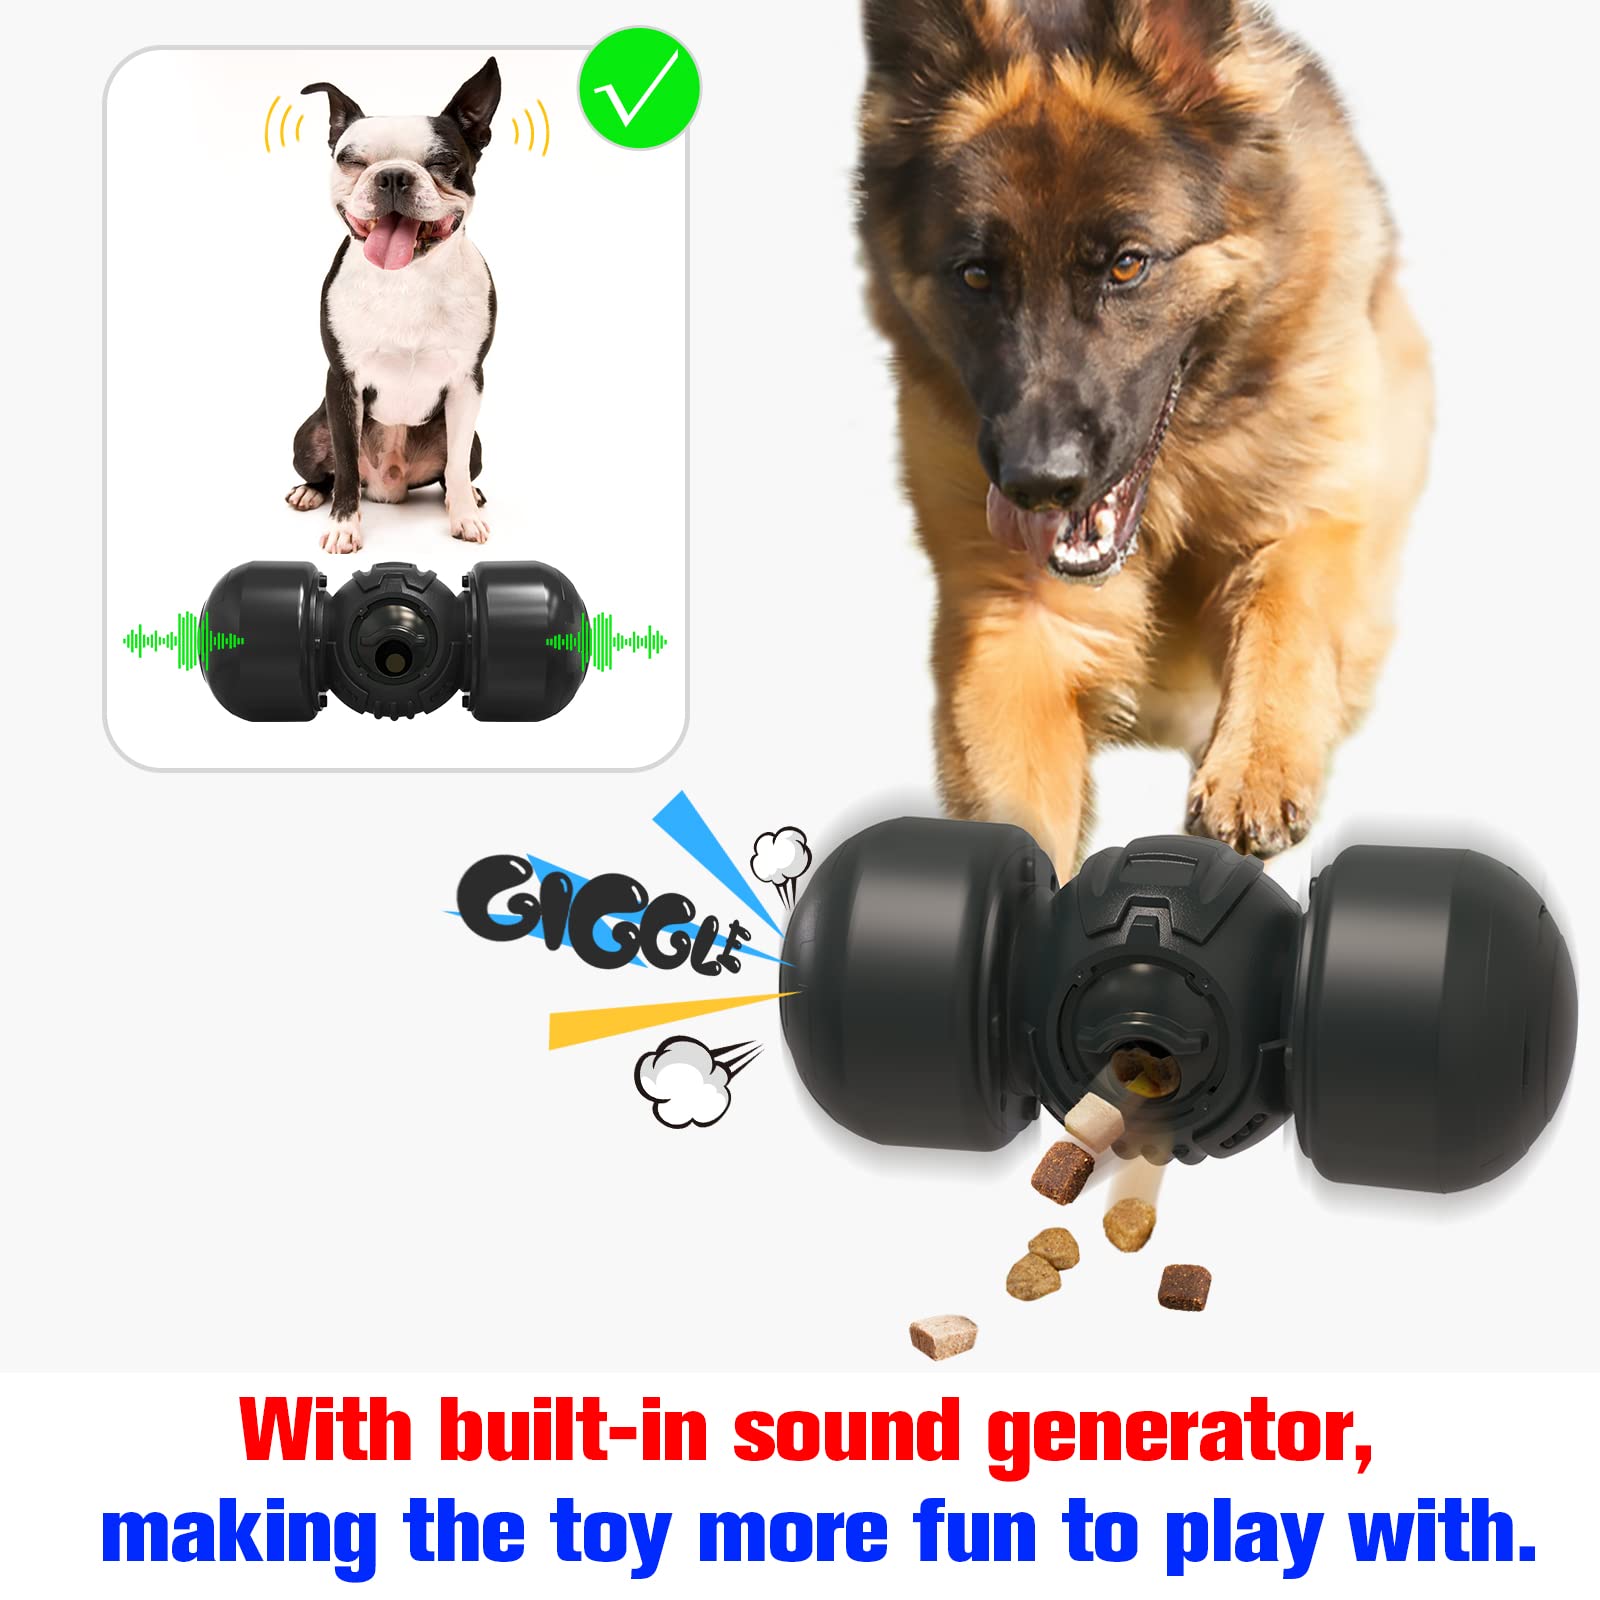 KADTC Dog Puzzles Toys Adjustable Food Dispensing Treat Dispenser Dogs Puzzle Feeder Indestructible Toy Wobble Wag Talking Giggle Squeaky Feeding Puppy Only For Medium/Large Aggressive Chewers Breed